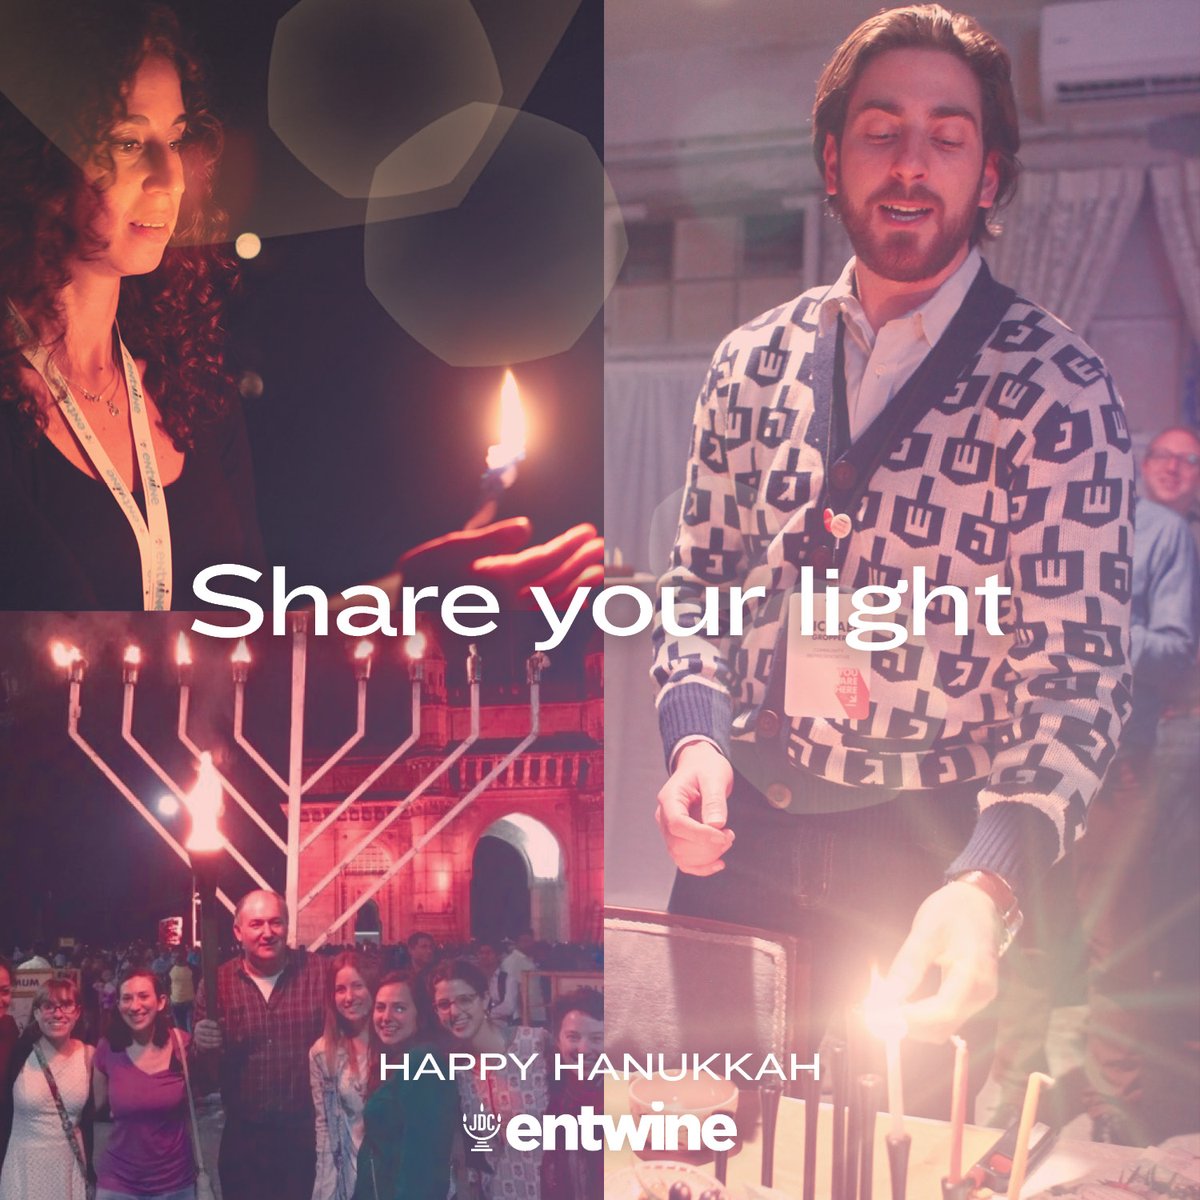 Tonight begins the Jewish holiday of Hanukkah! A holiday that emphasizes bringing more light into the world. Each of us has that power to brighten someone's day, say a kind word, or make a lasting impact. Happy Hanukkah!